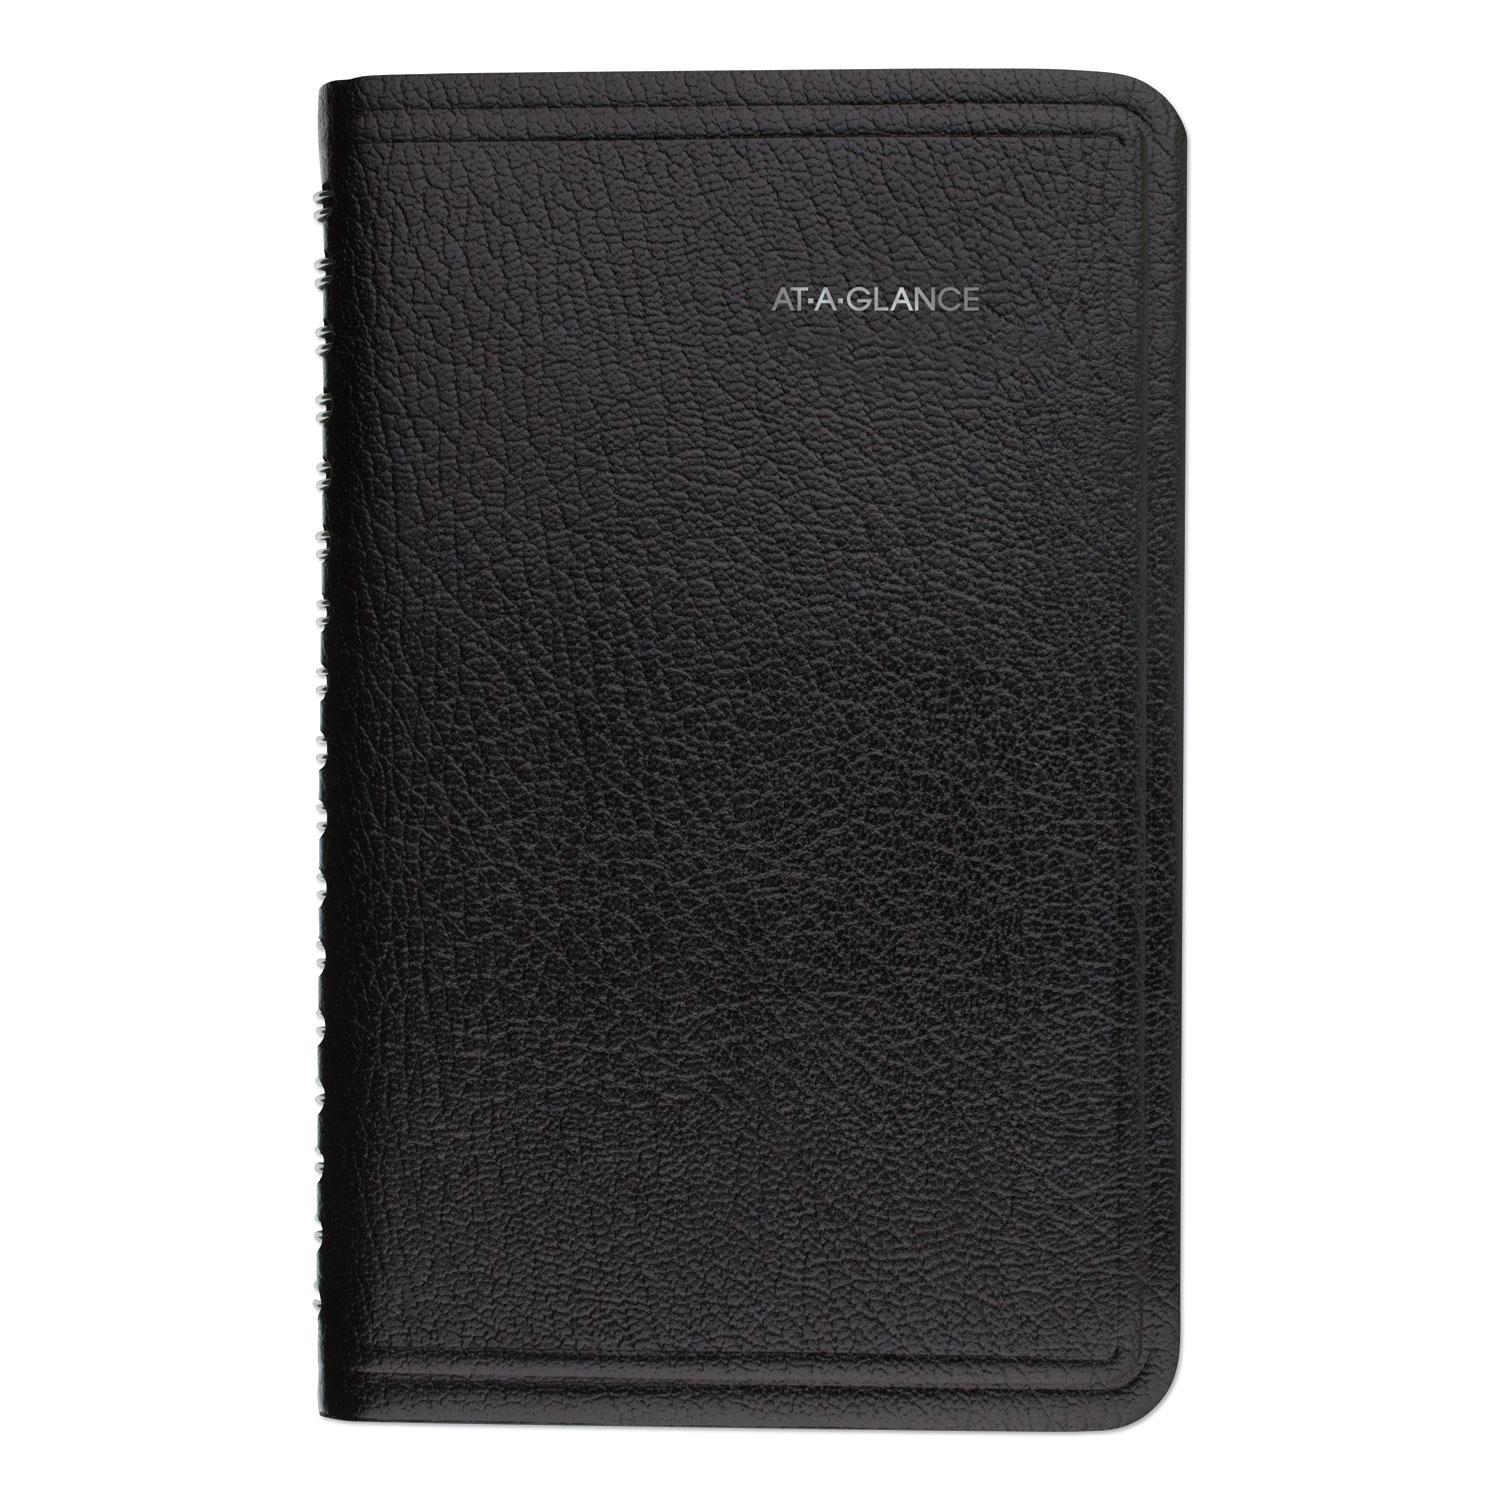  AT-A-GLANCE G250-00 Weekly Pocket Appt. Book, Telephone/Address Section, 6 x 3 3/4, Black, 2020 (AAGG25000) 